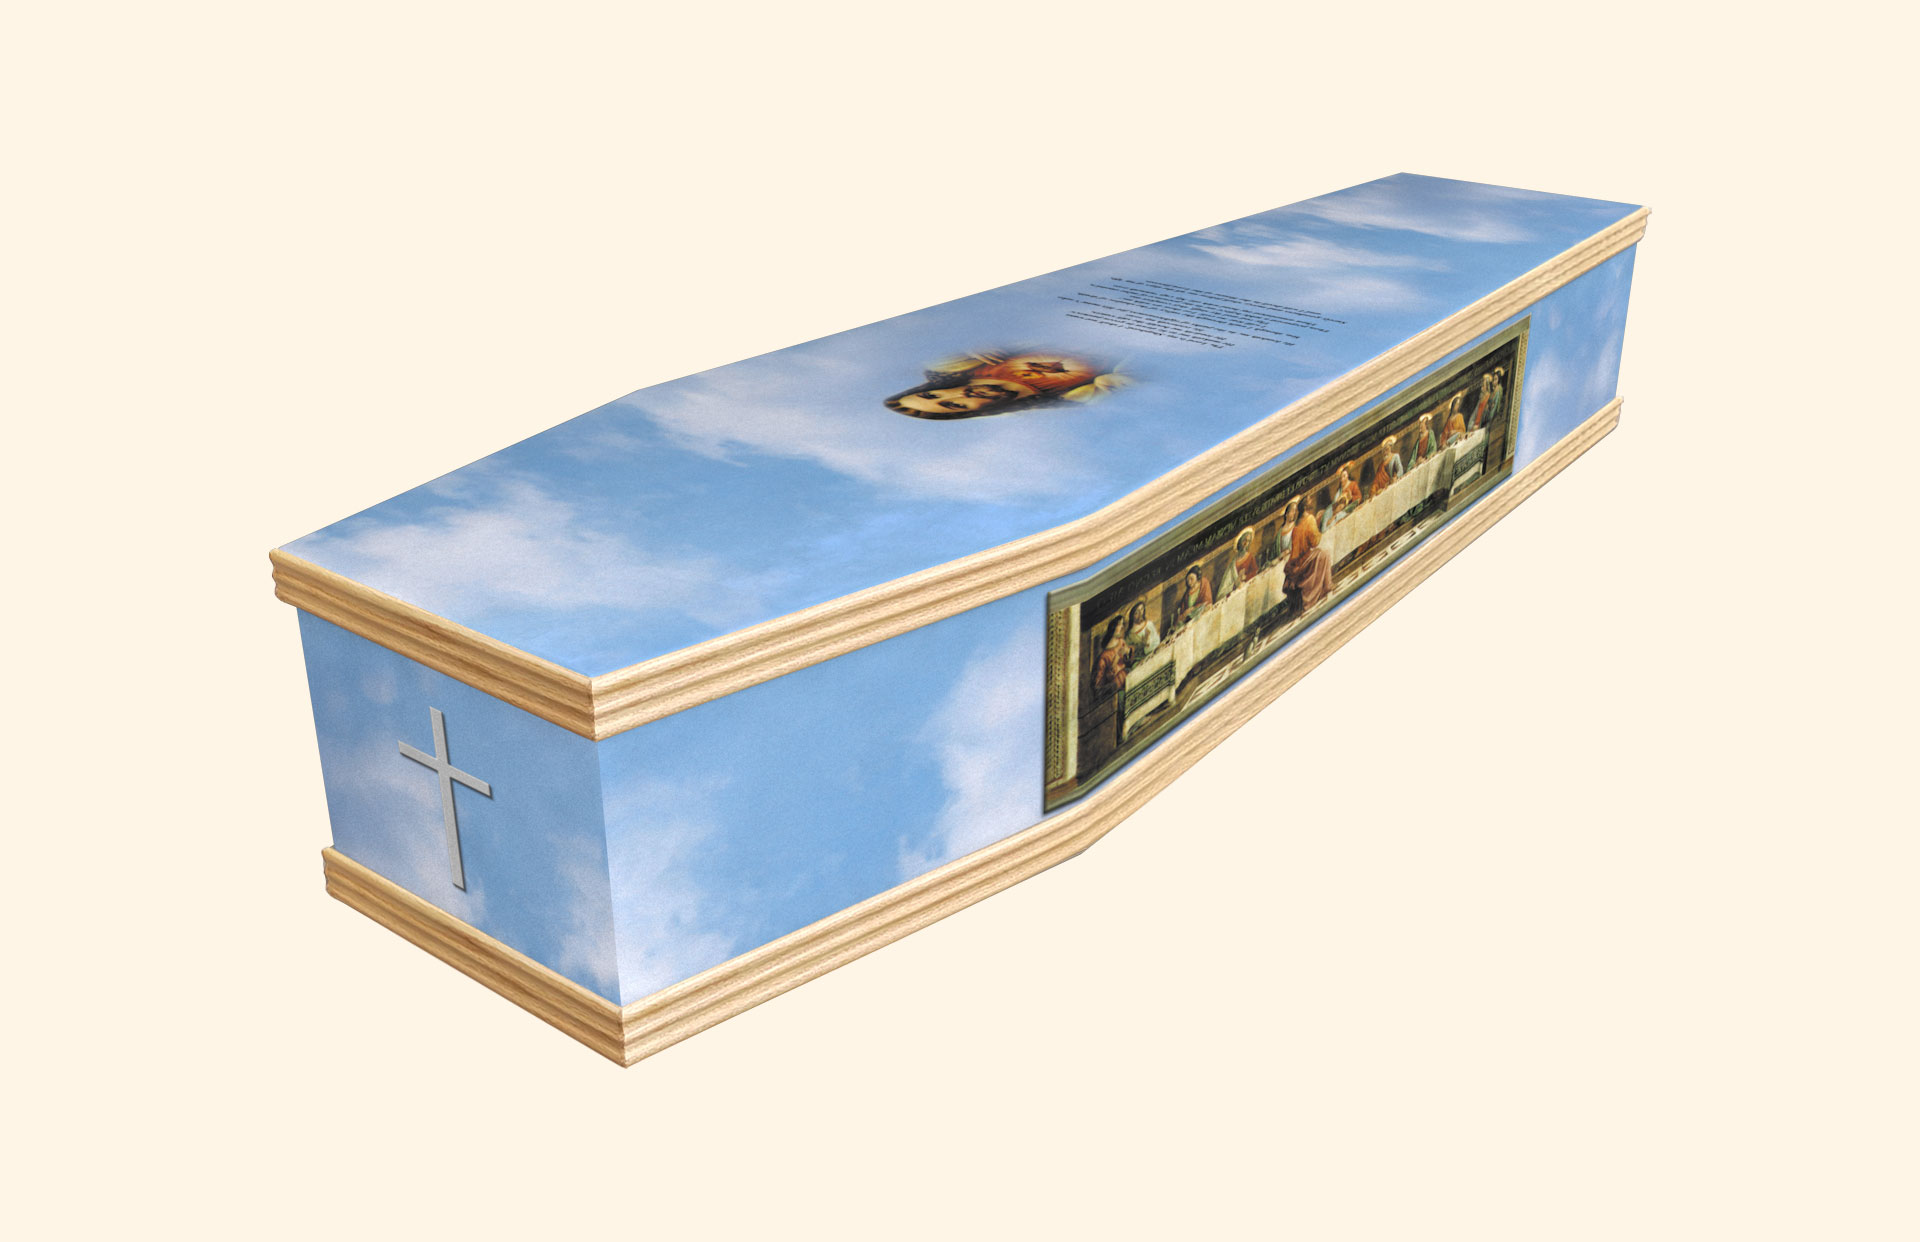 Last Supper 23rd Psalm design on a classic coffin